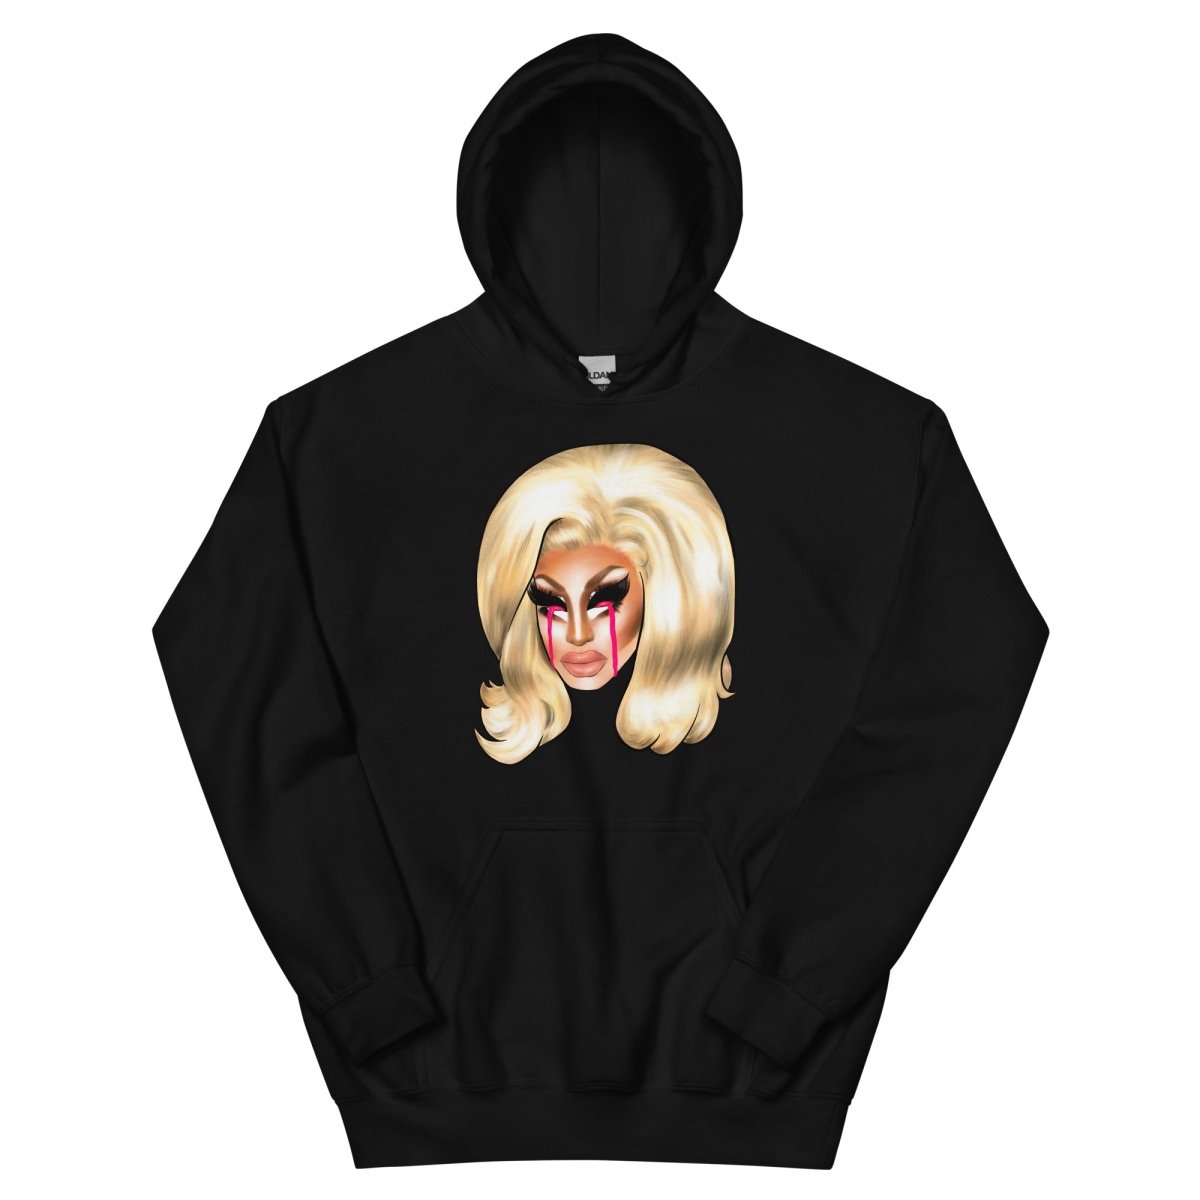 Trixie Mattel - Cry for Help Hoodie - dragqueenmerch